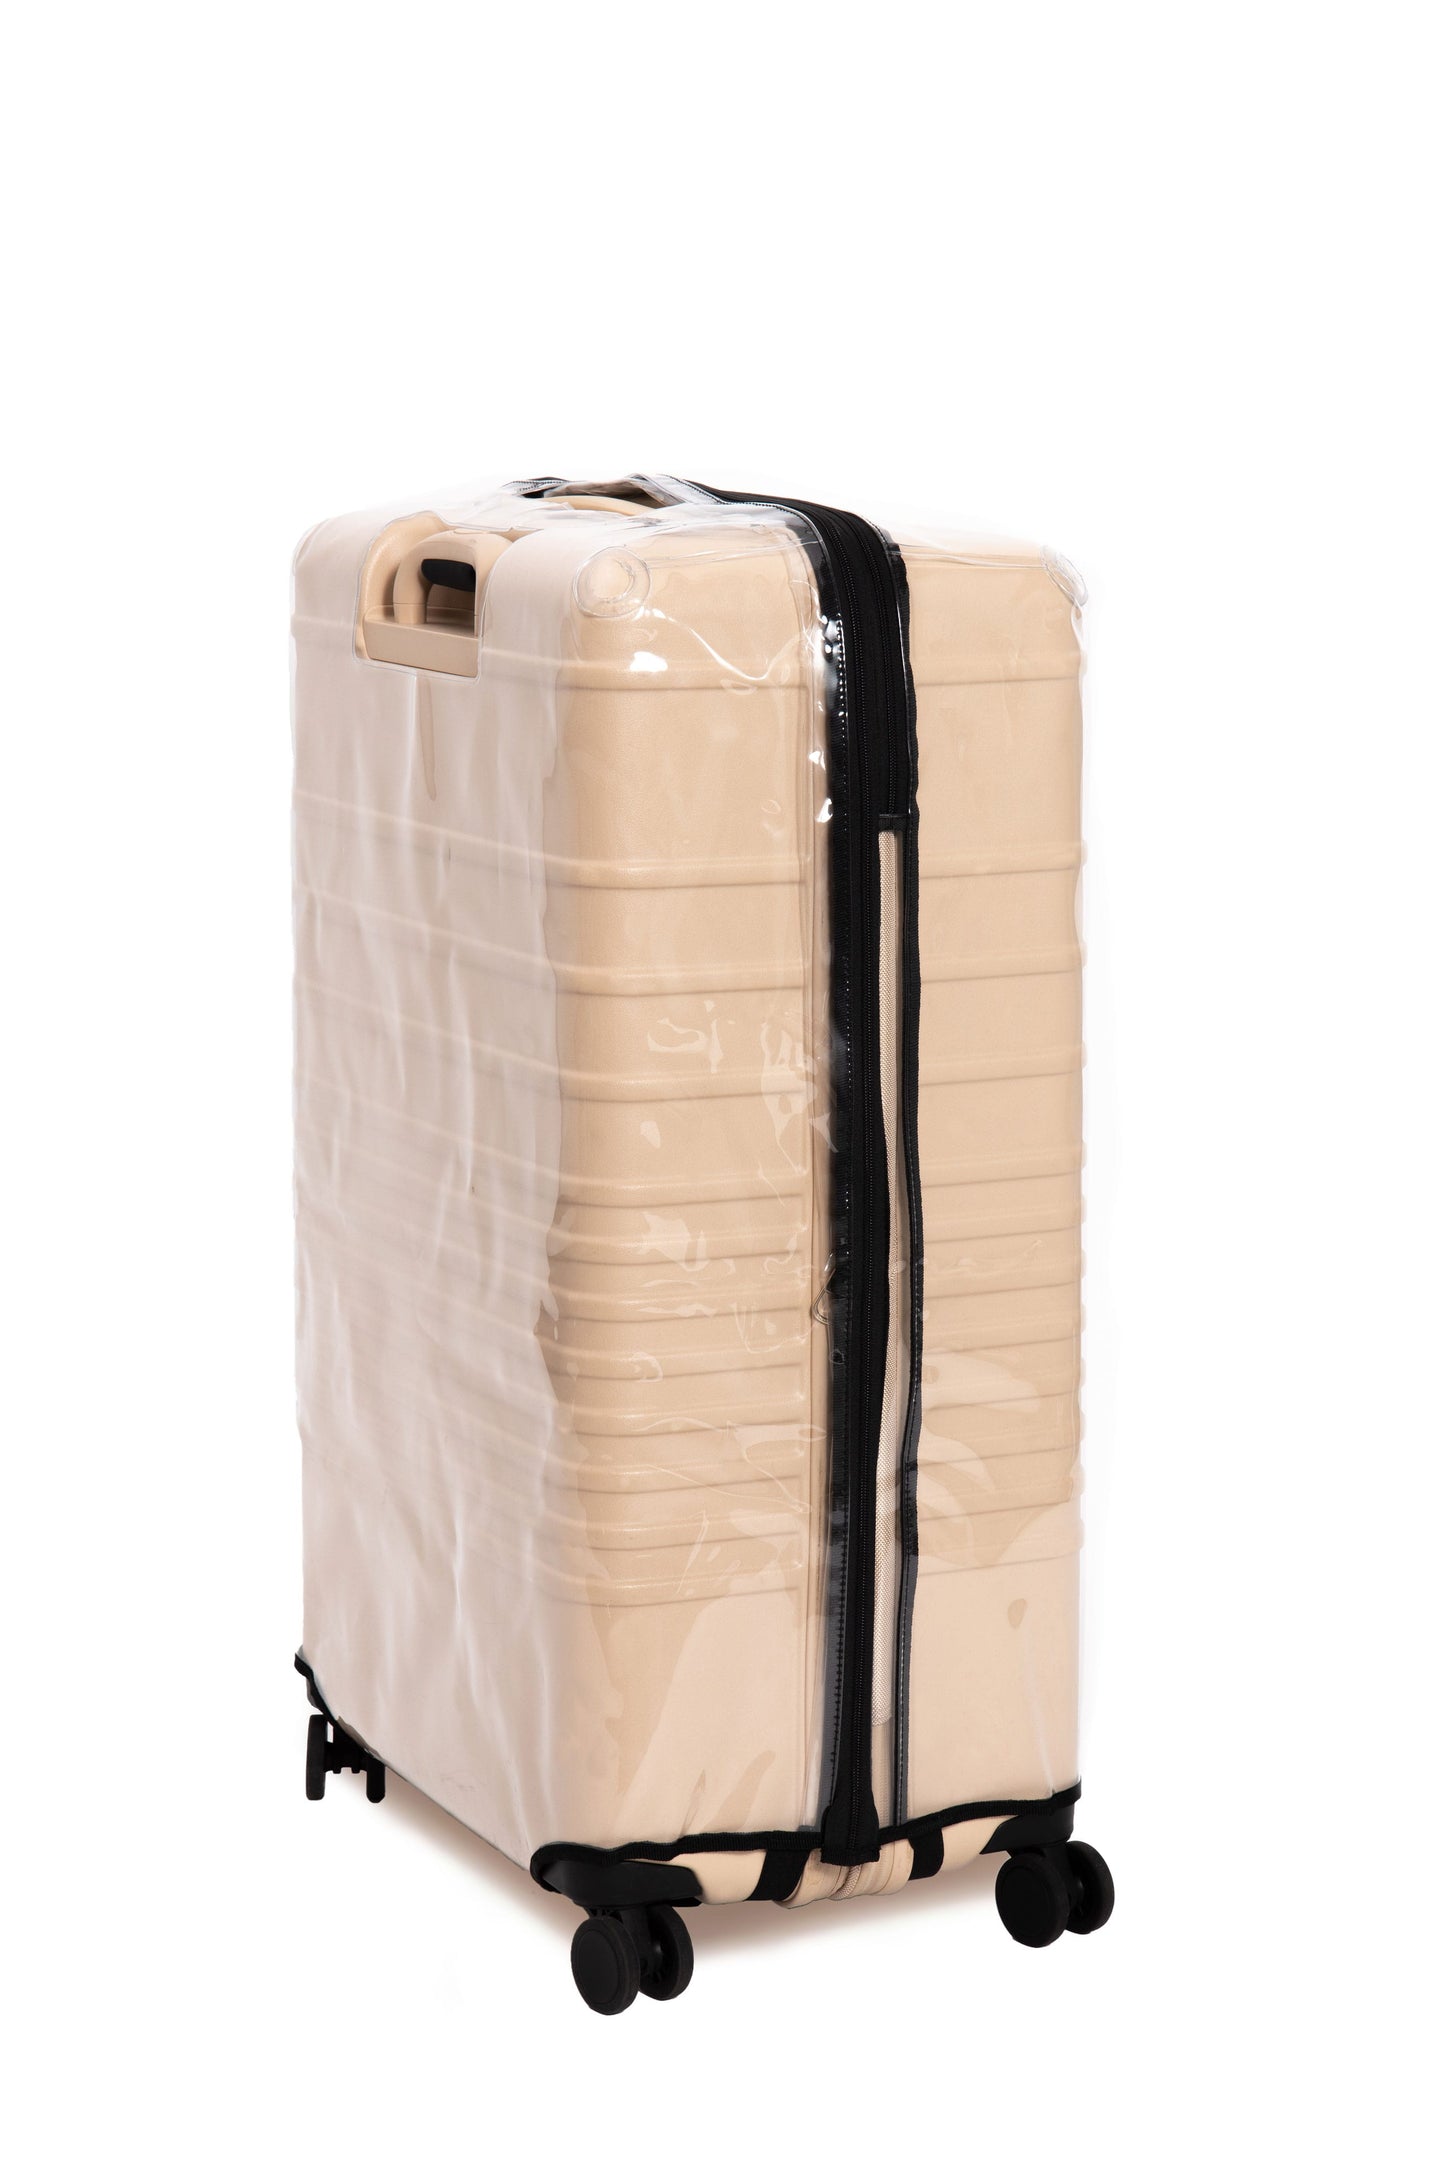 BÉIS 'The Large Check-In Luggage Cover' - Clear 29 Luggage Cover